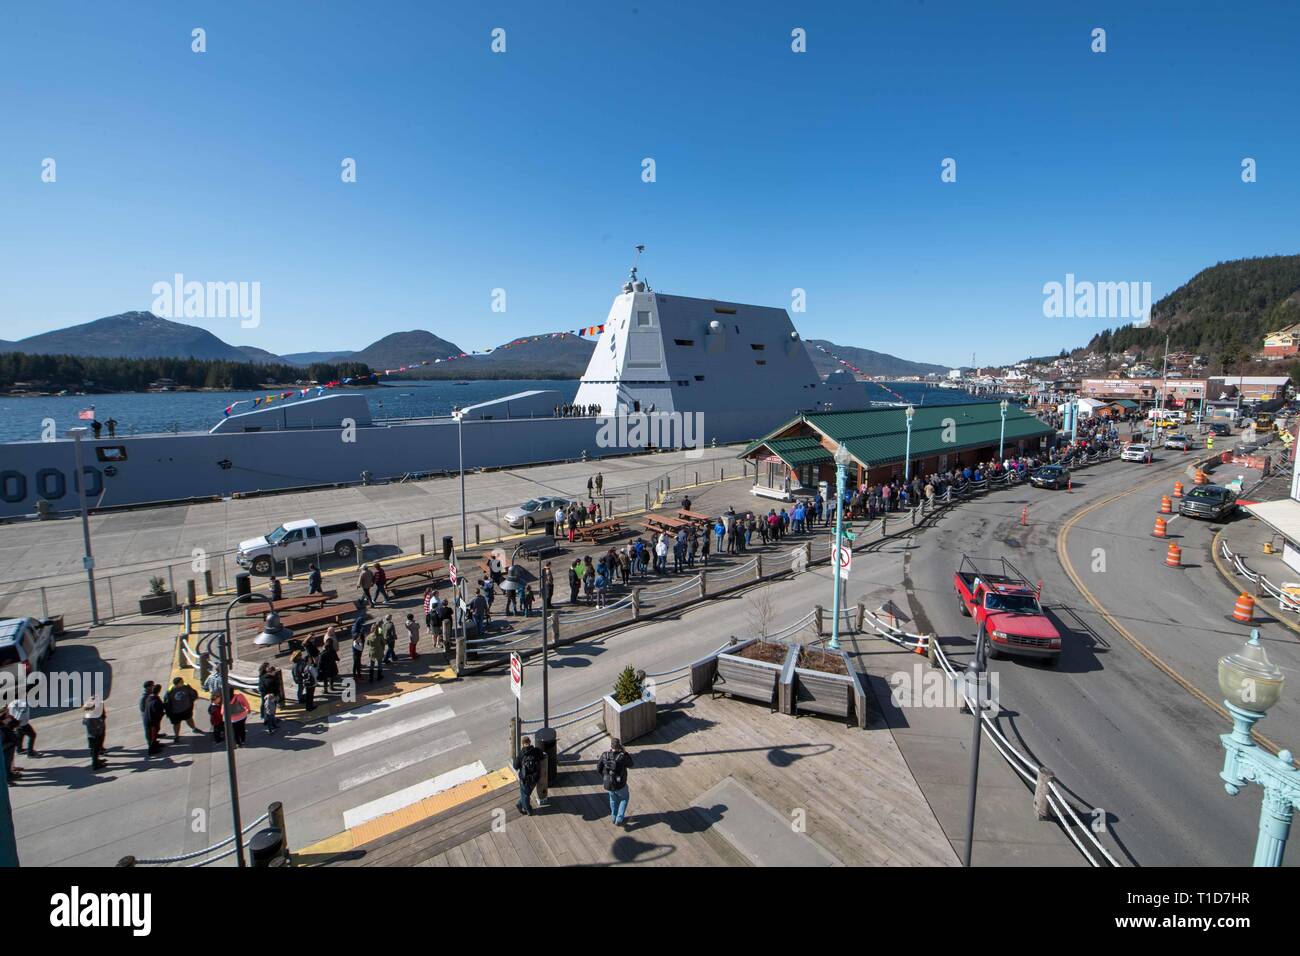 190324-N-DA737-0100 KETCHIKAN, Alaska (Mar 24, 2019) Visitors line up along the pier for a tour of guided-missile destroyer USS Zumwalt (DDG 1000). Zumwalt is conducting the port visit as part of its routine underway operations in the eastern Pacific. Zumwalt-class destroyers provide the Navy with agile military advantages at sea and with ground forces ashore. (U.S. Navy photo by Mass Communications Specialist 2nd Class Jonathan Jiang) Stock Photo